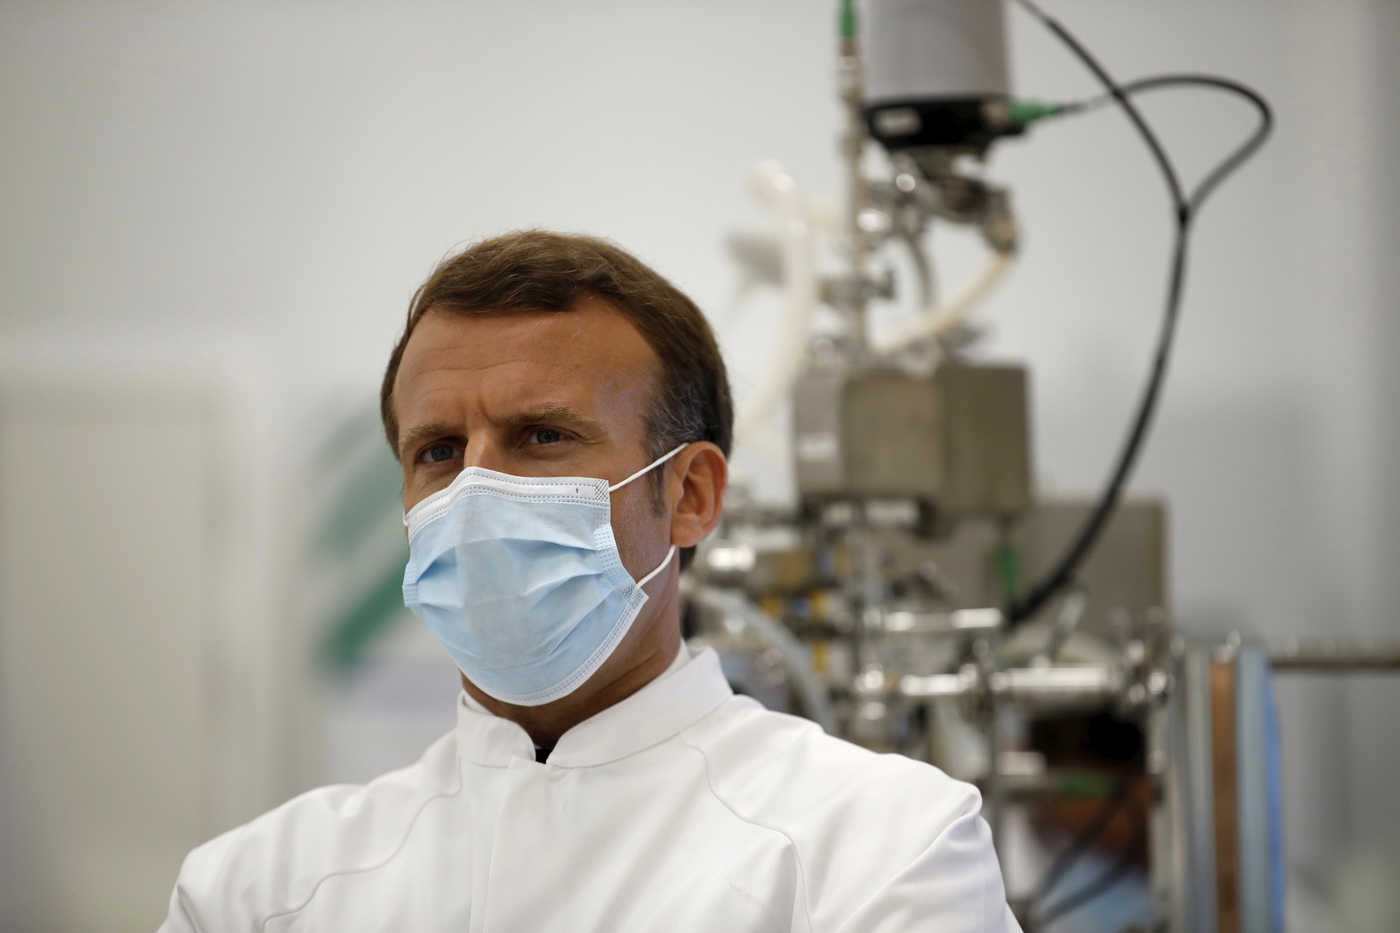 French President Emmanuel Macron, wearing a protective face mask, visits an industrial development laboratory at the French drugmaker's vaccine unit Sanofi Pasteur plant in Marcy-l'Etoile, near Lyon, central France, Tuesday, June 16, 2020. The visit comes after rival pharmaceutical company AstraZeneca this weekend announced a deal to supply 400 million vaccine doses to EU countries, including France. (Gonzalo Fuentes/Pool via AP)